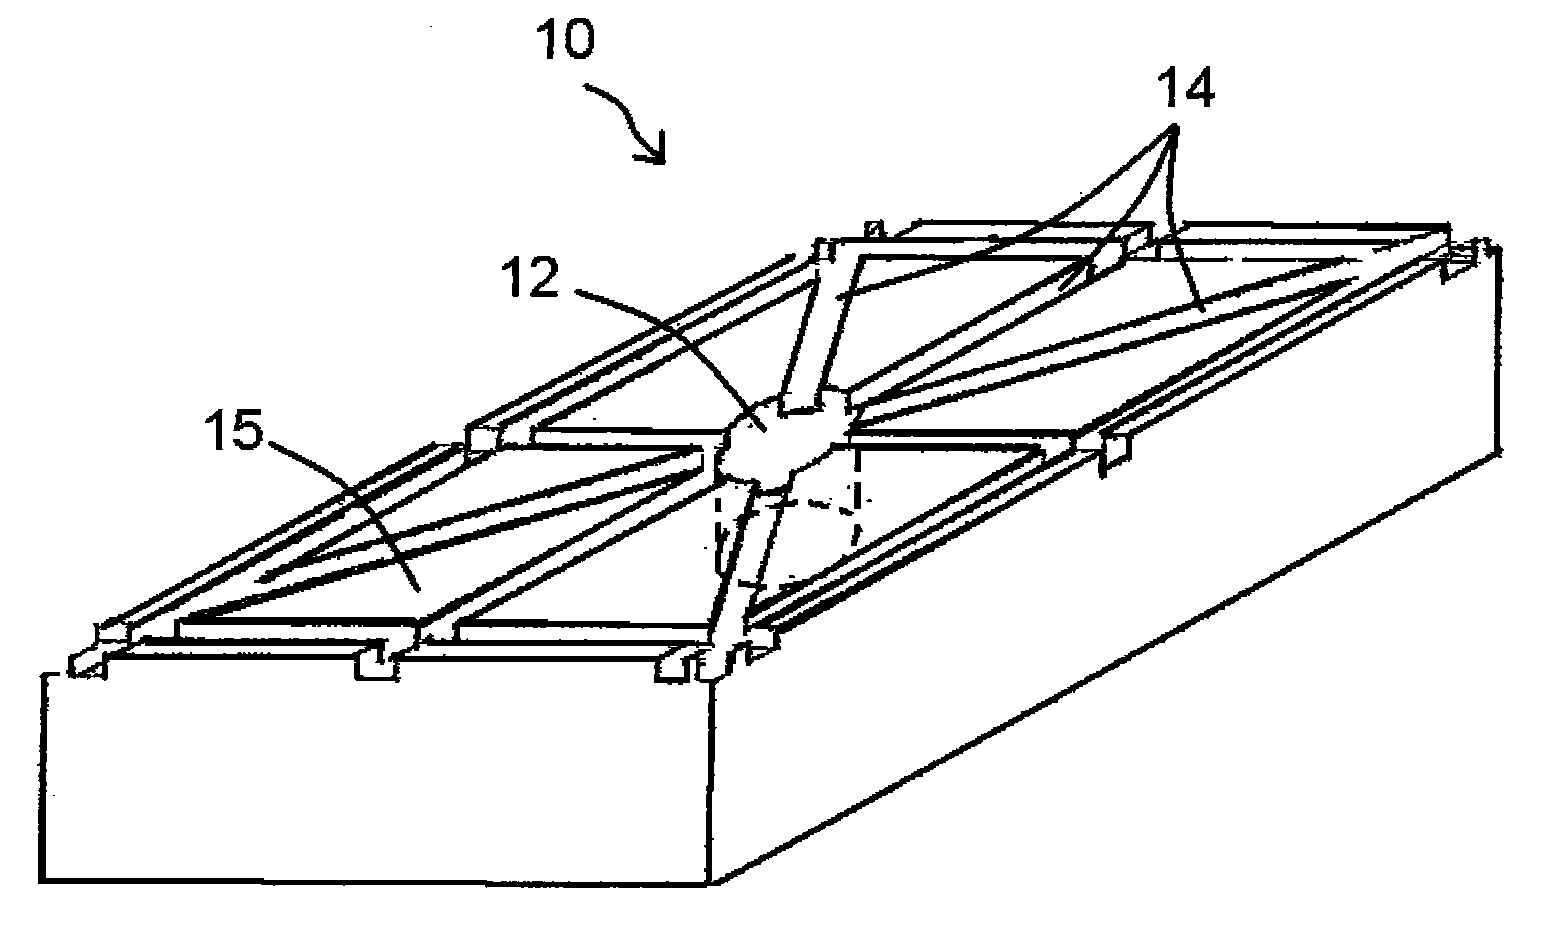 Resilient abrasive article and method of manufacture